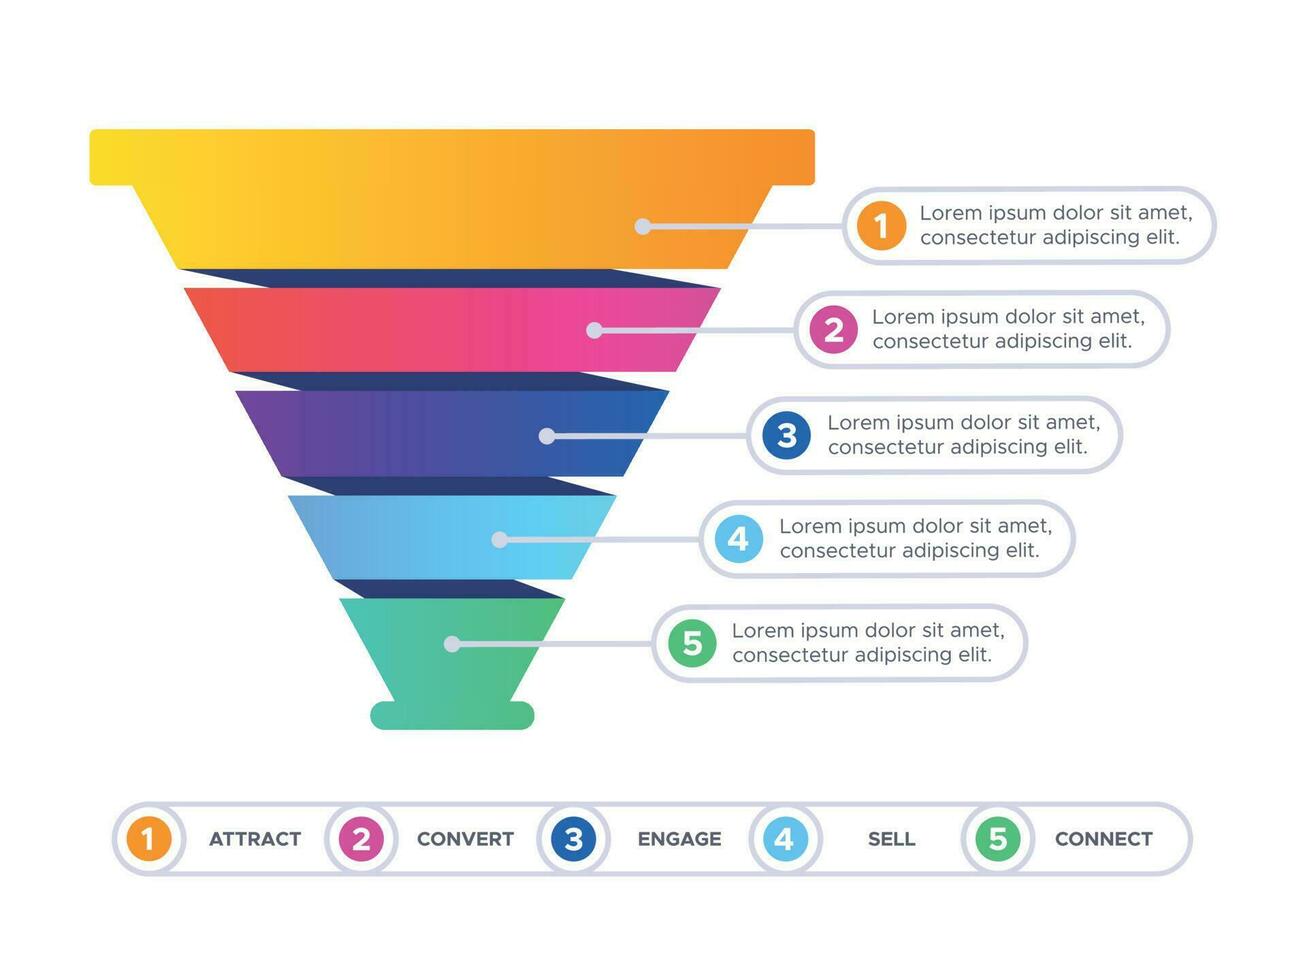 Funnel sales infographic. Marketing conversion cone chart, business sale filter and pyramid graphic flat vector illustration